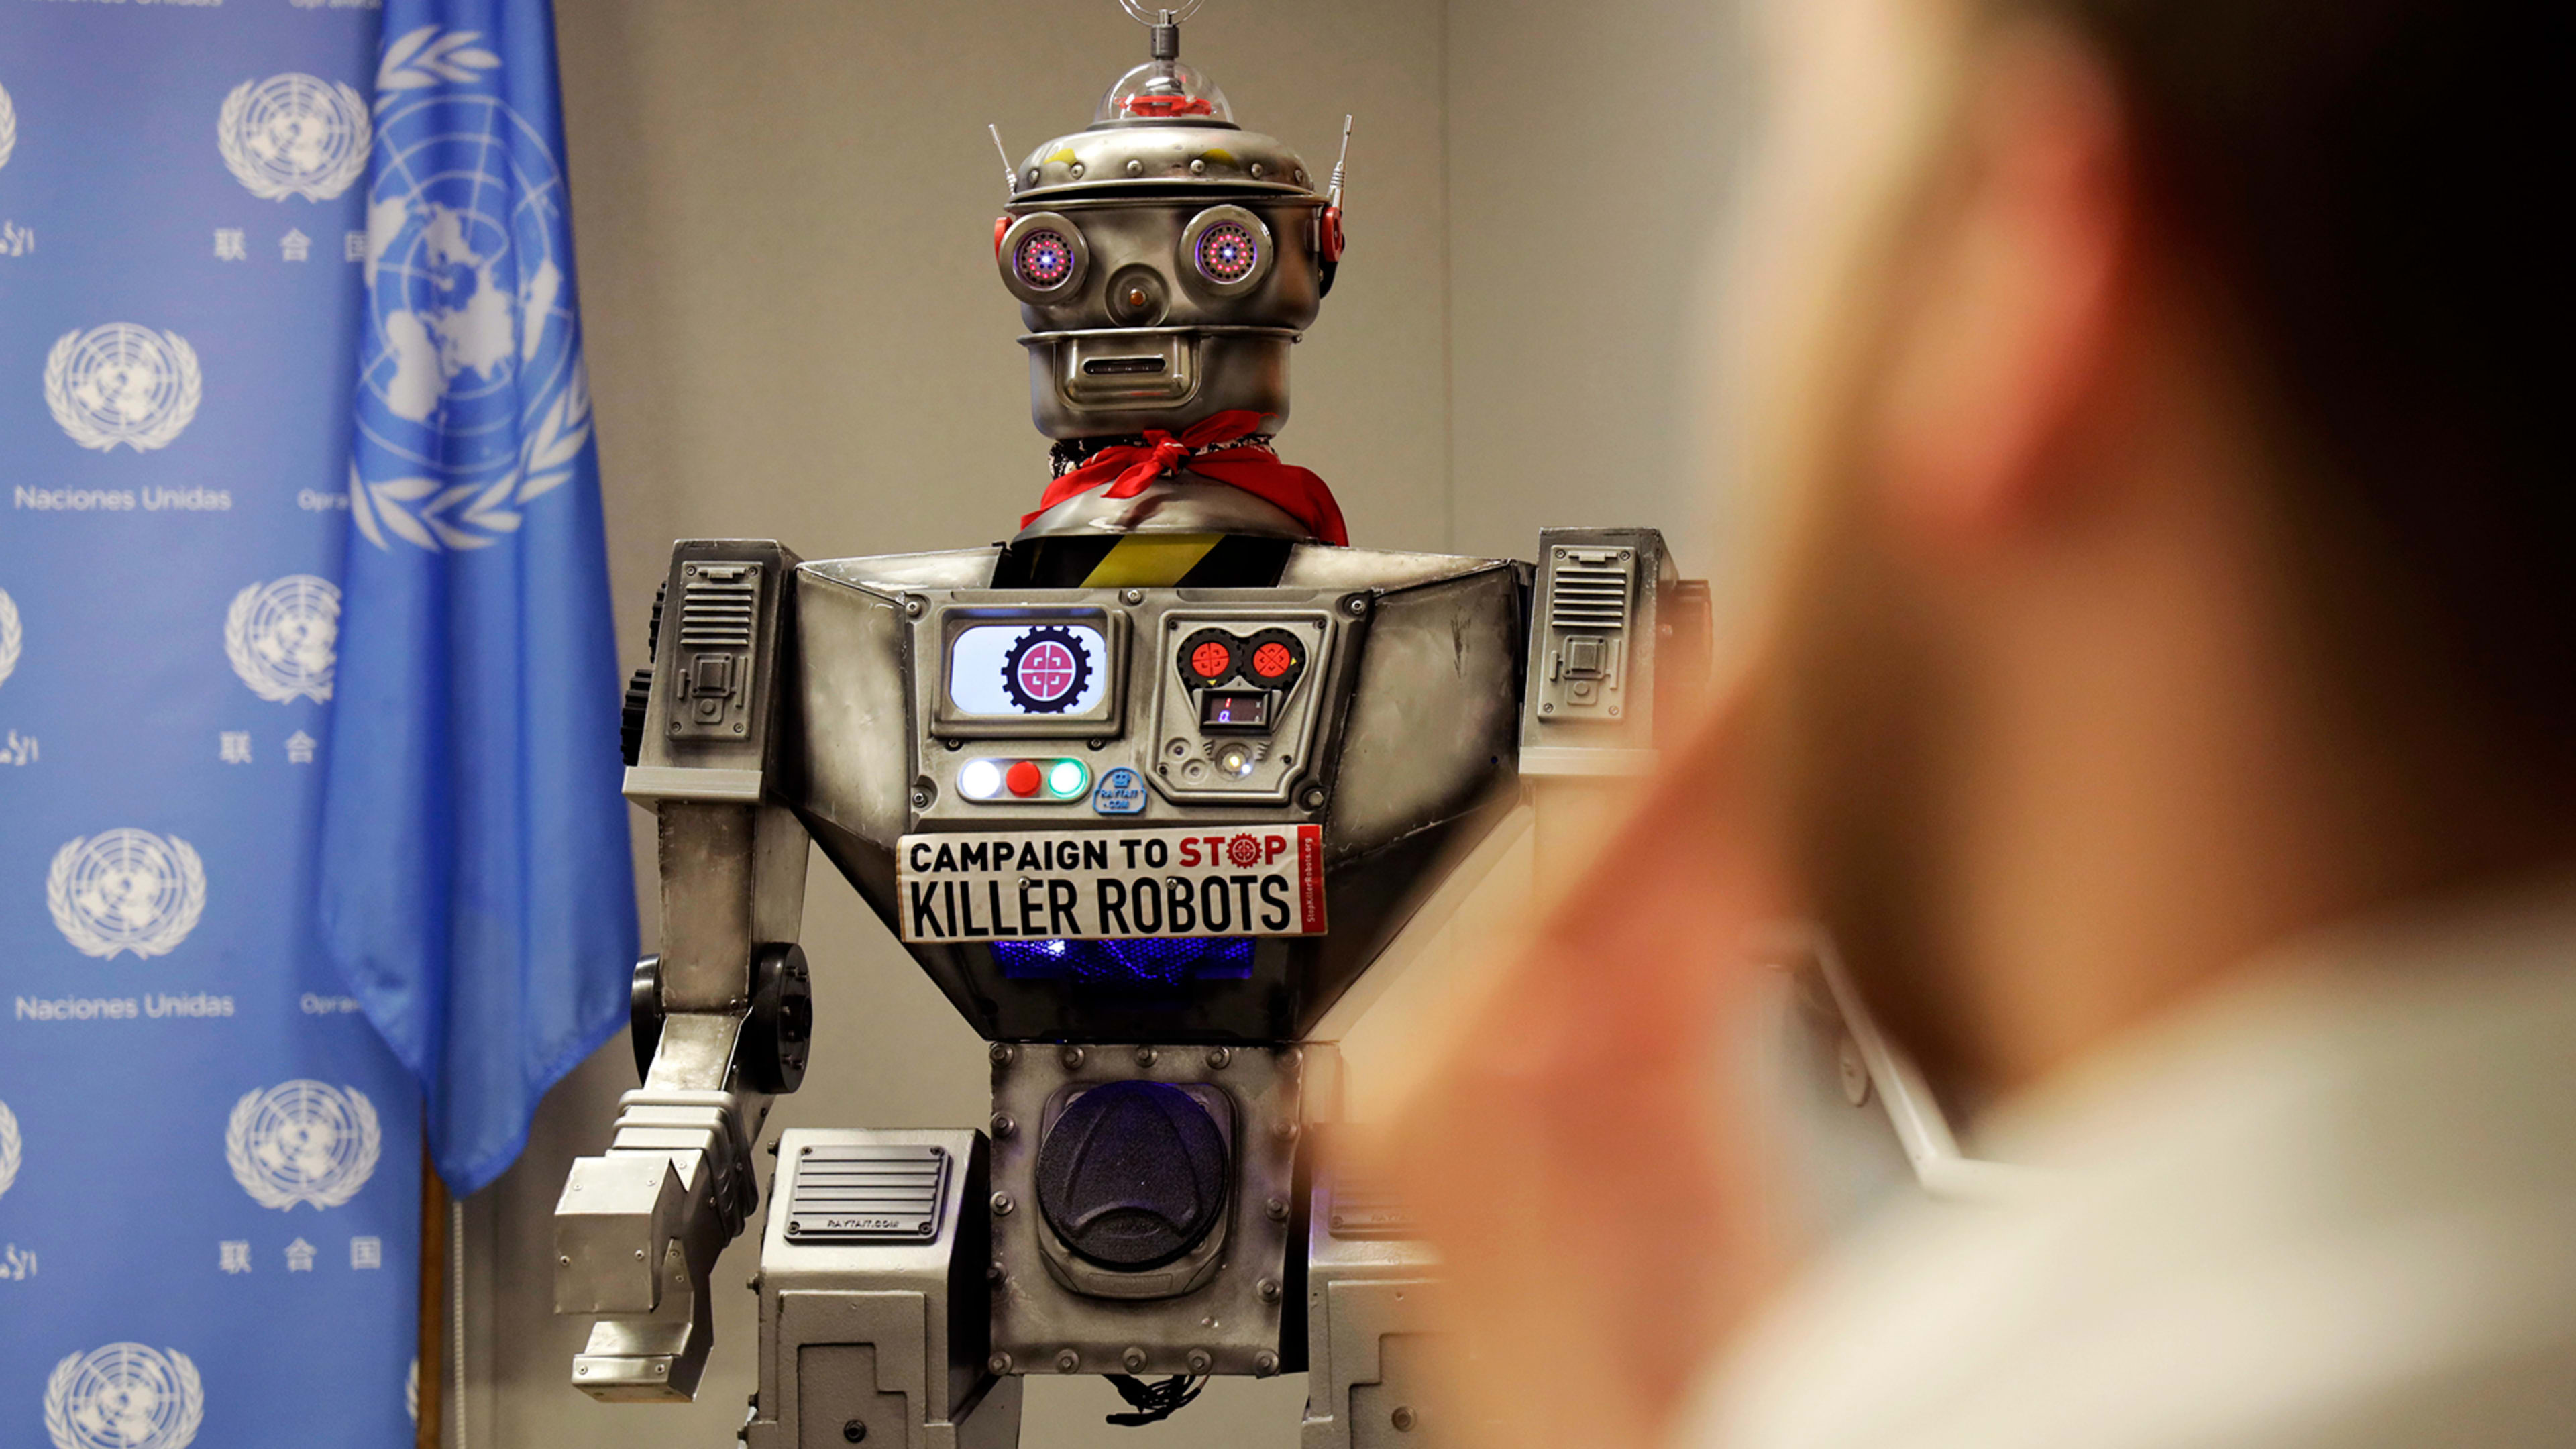 What you need to consider about ‘killer robots’ and autonomous weapons research